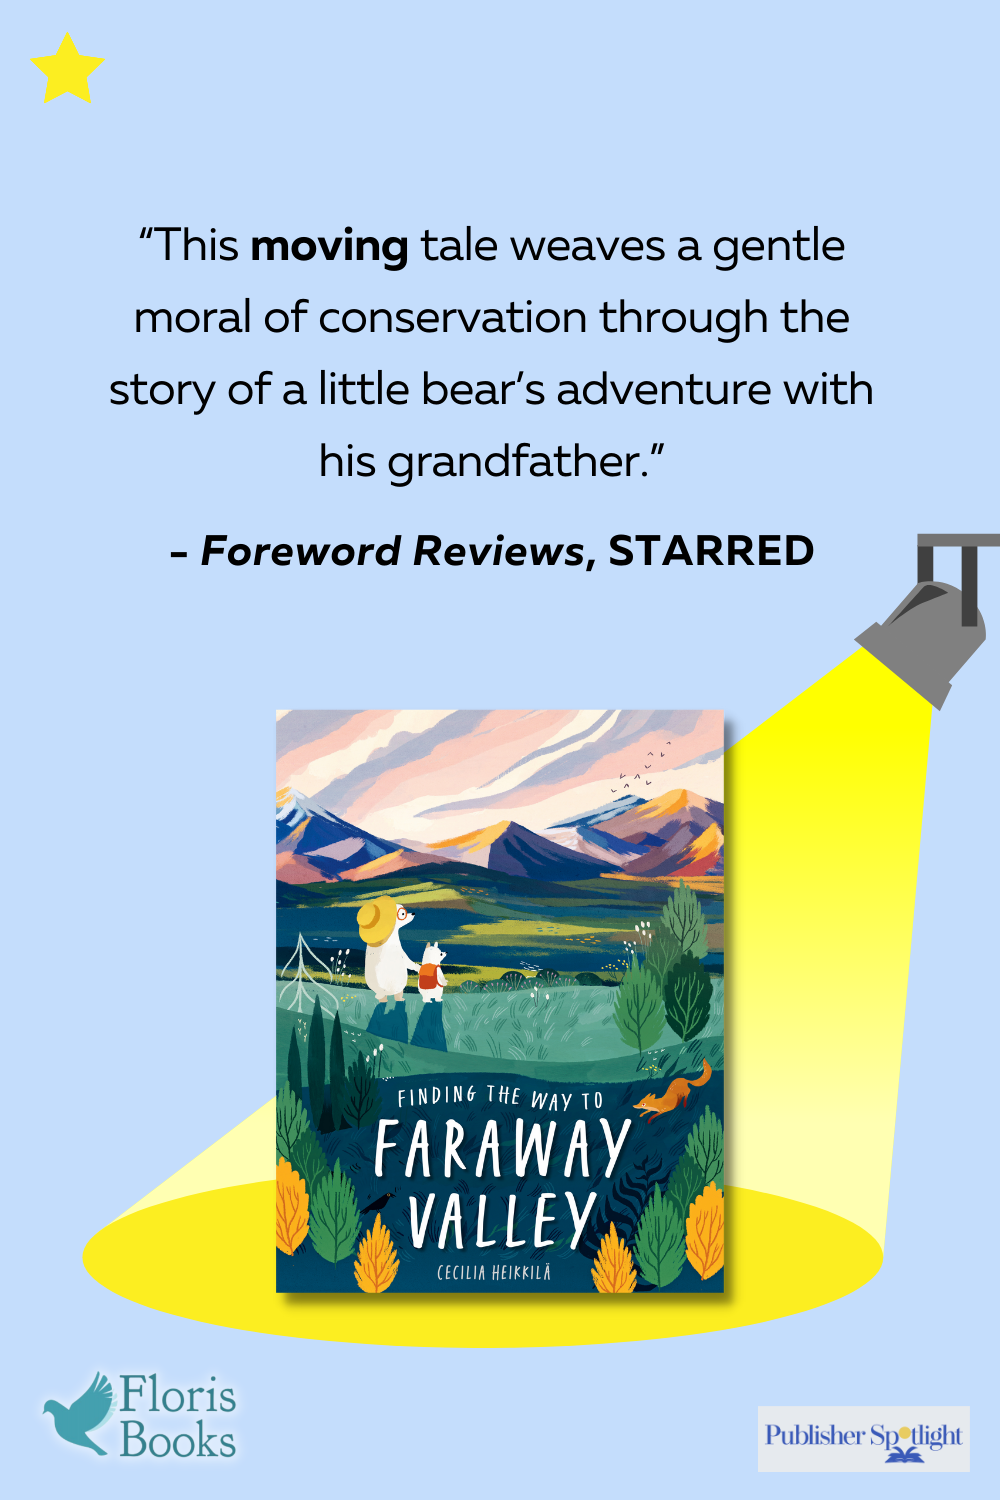 Finding the Way to Faraway Valley cover image on blue graphic under a spotlight